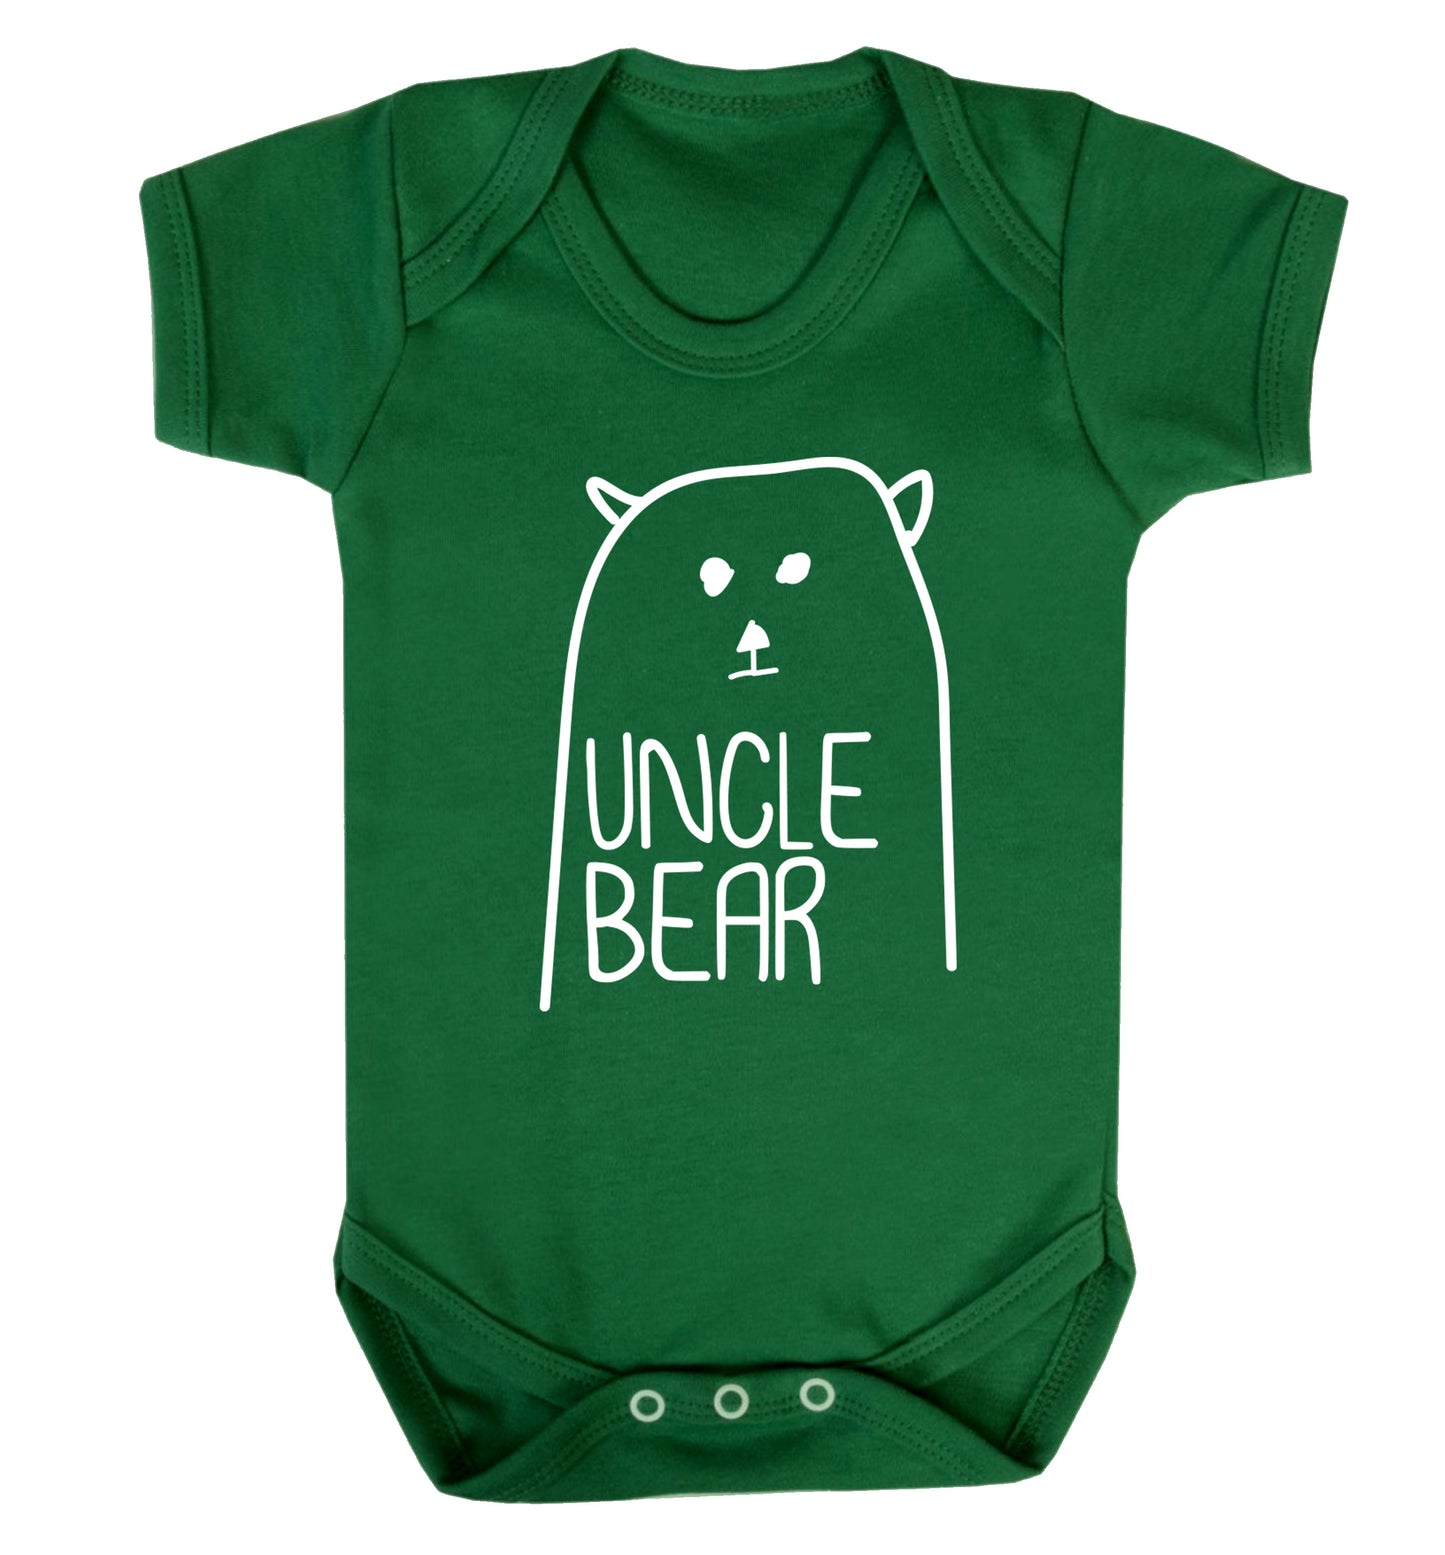 Uncle bear Baby Vest green 18-24 months